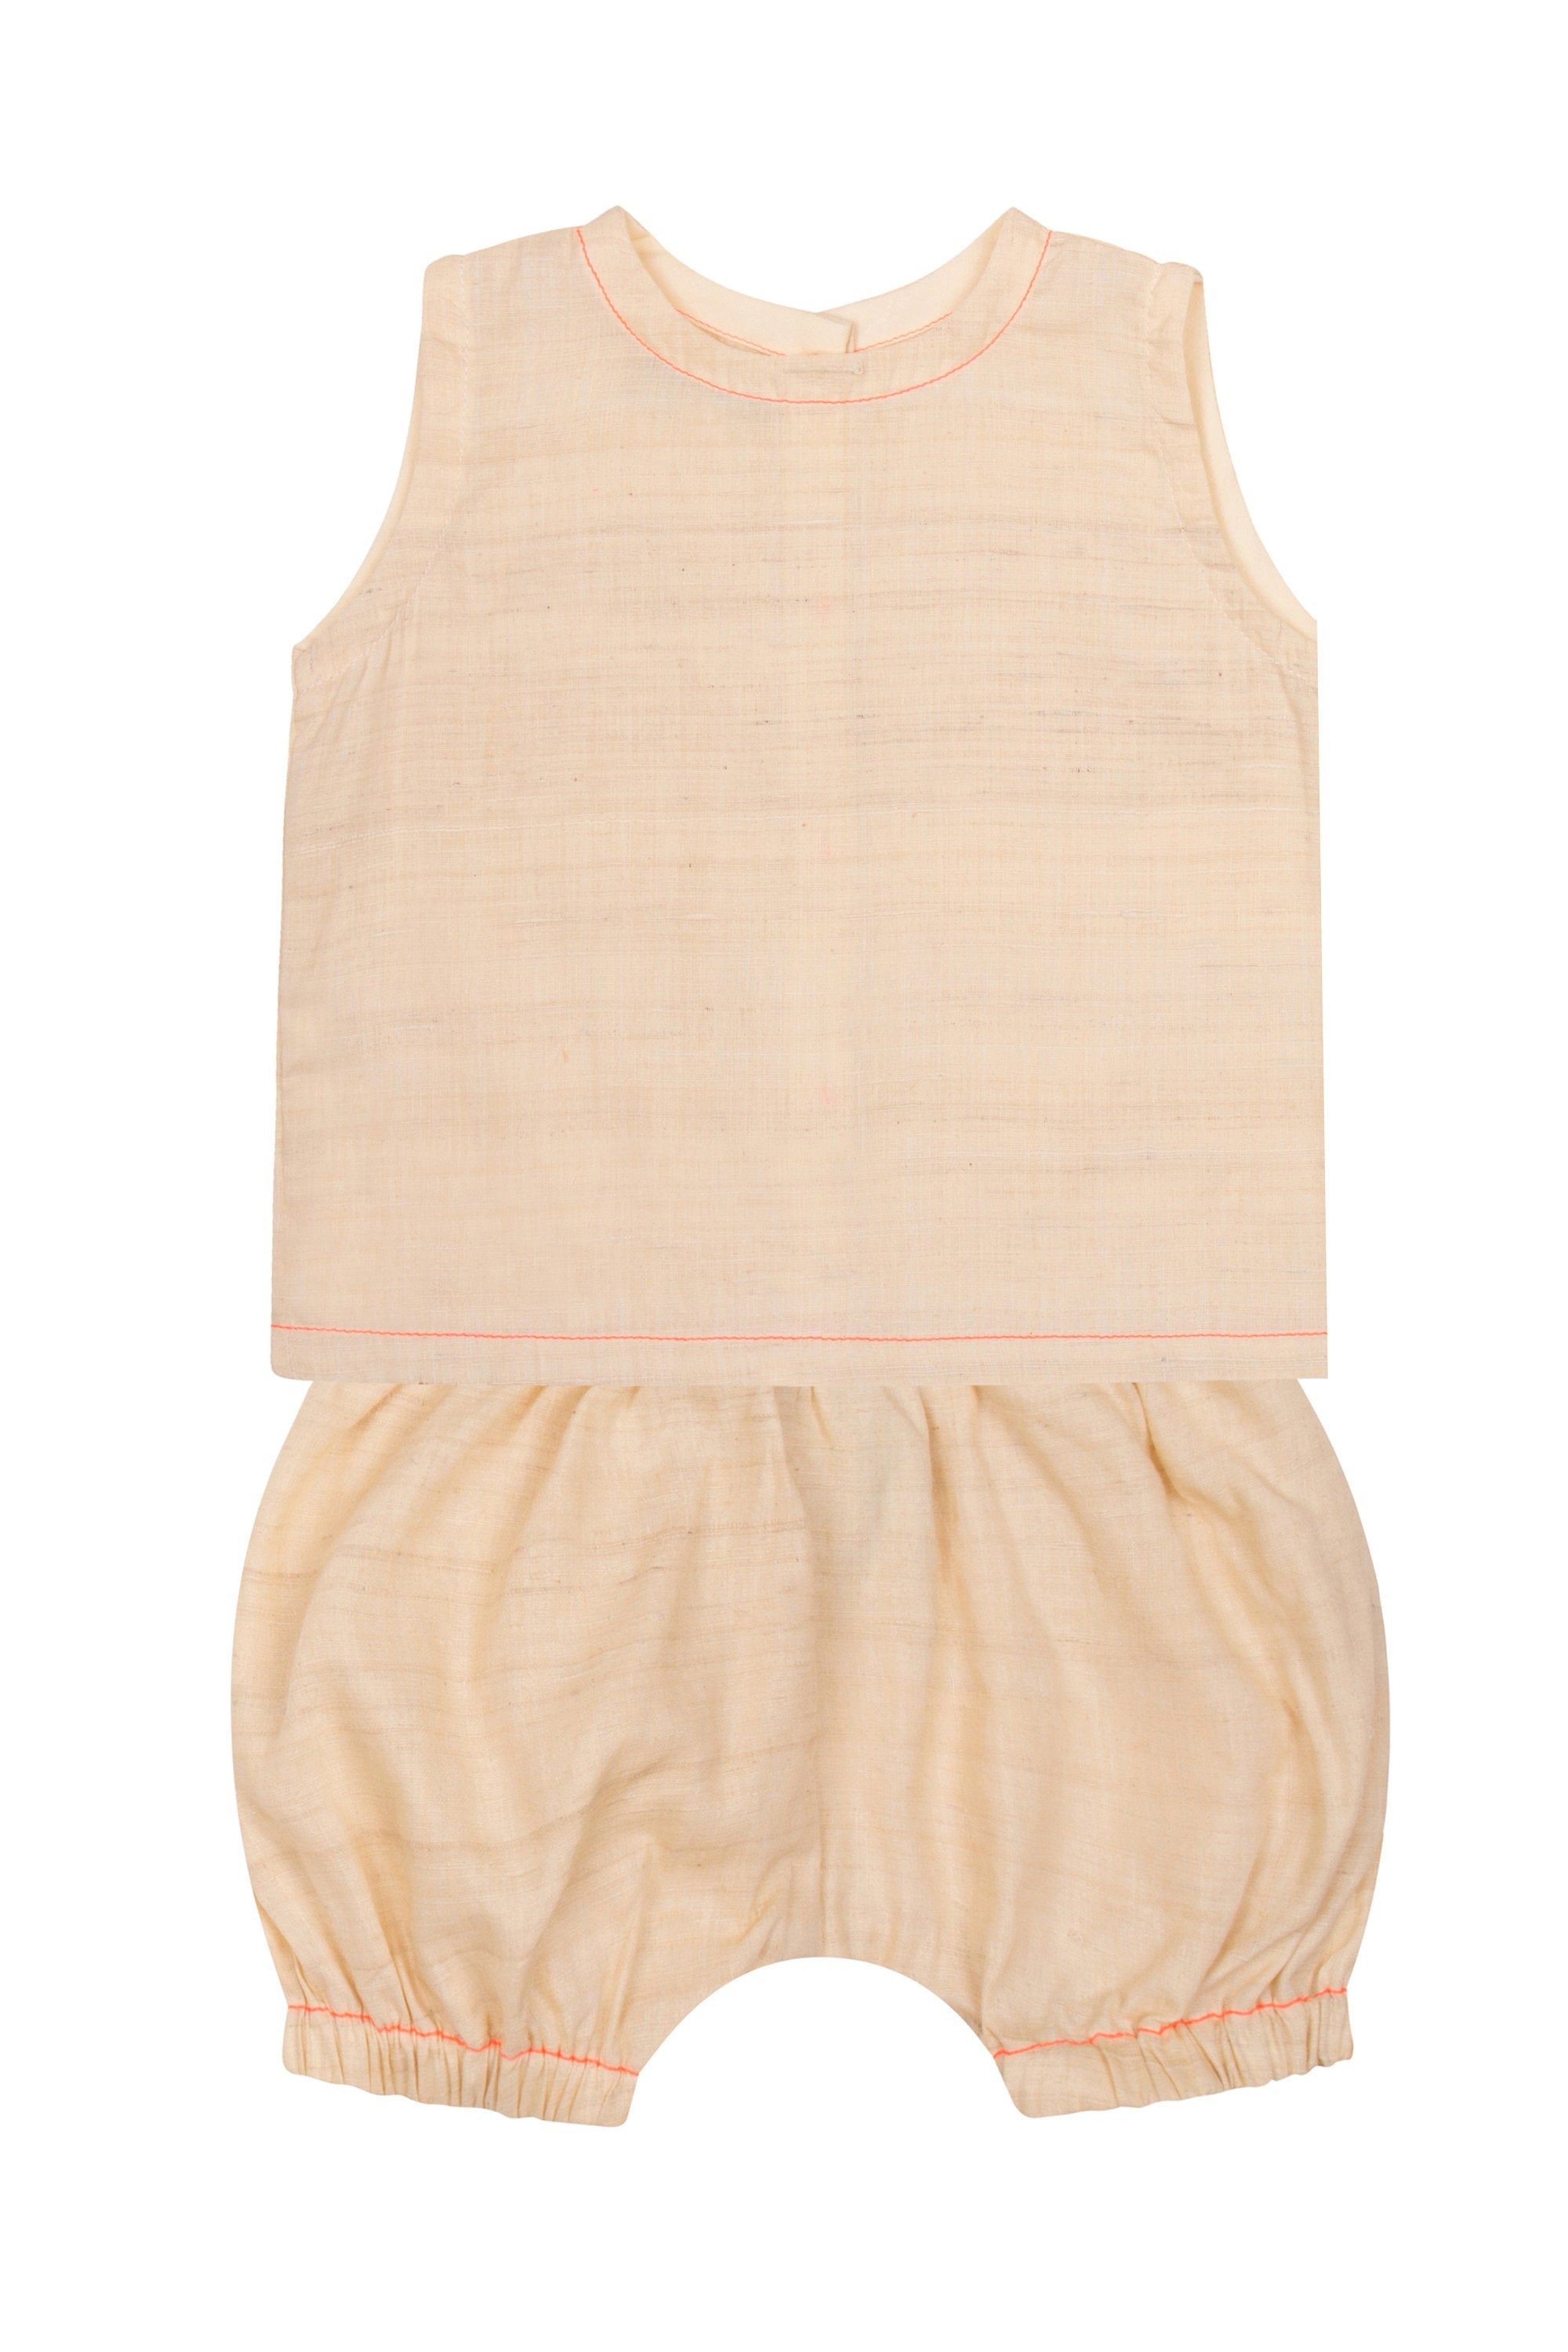 silk cotton handloom vest and pants set with neon stitching detail and buttons at the back.  perfect beachwear for baby